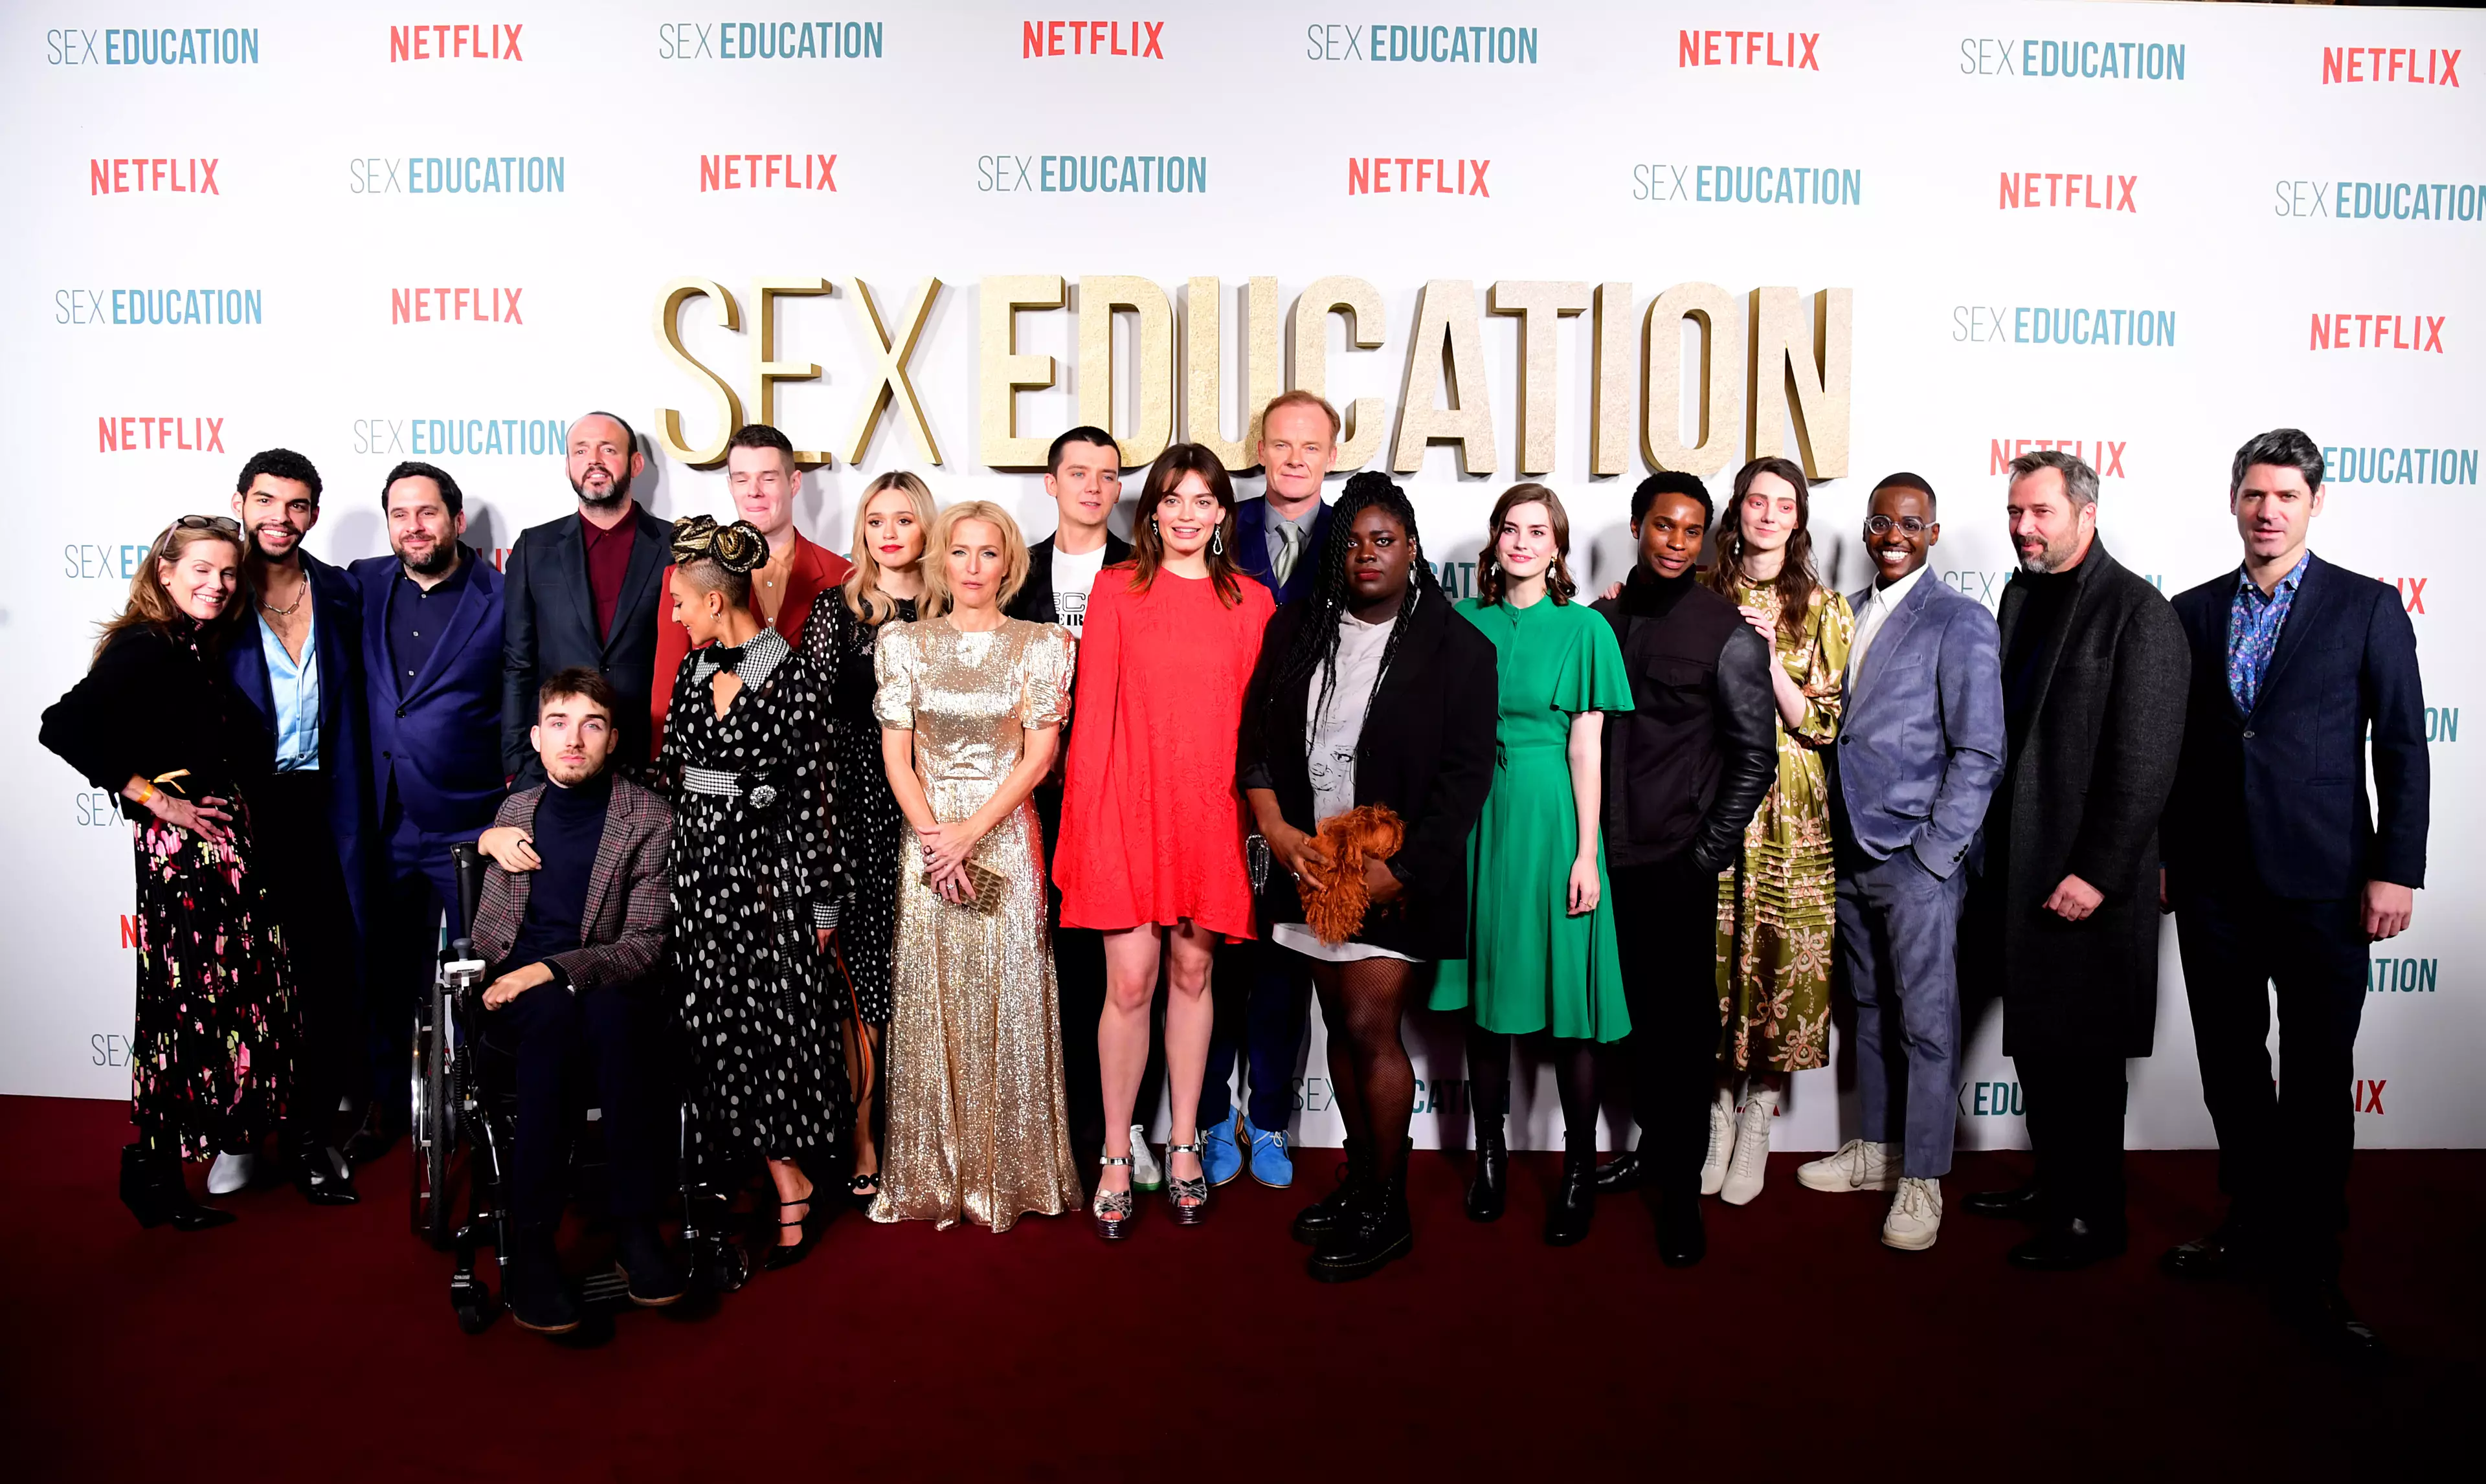 Sex Education season two cast at the world premiere in January 2020. (